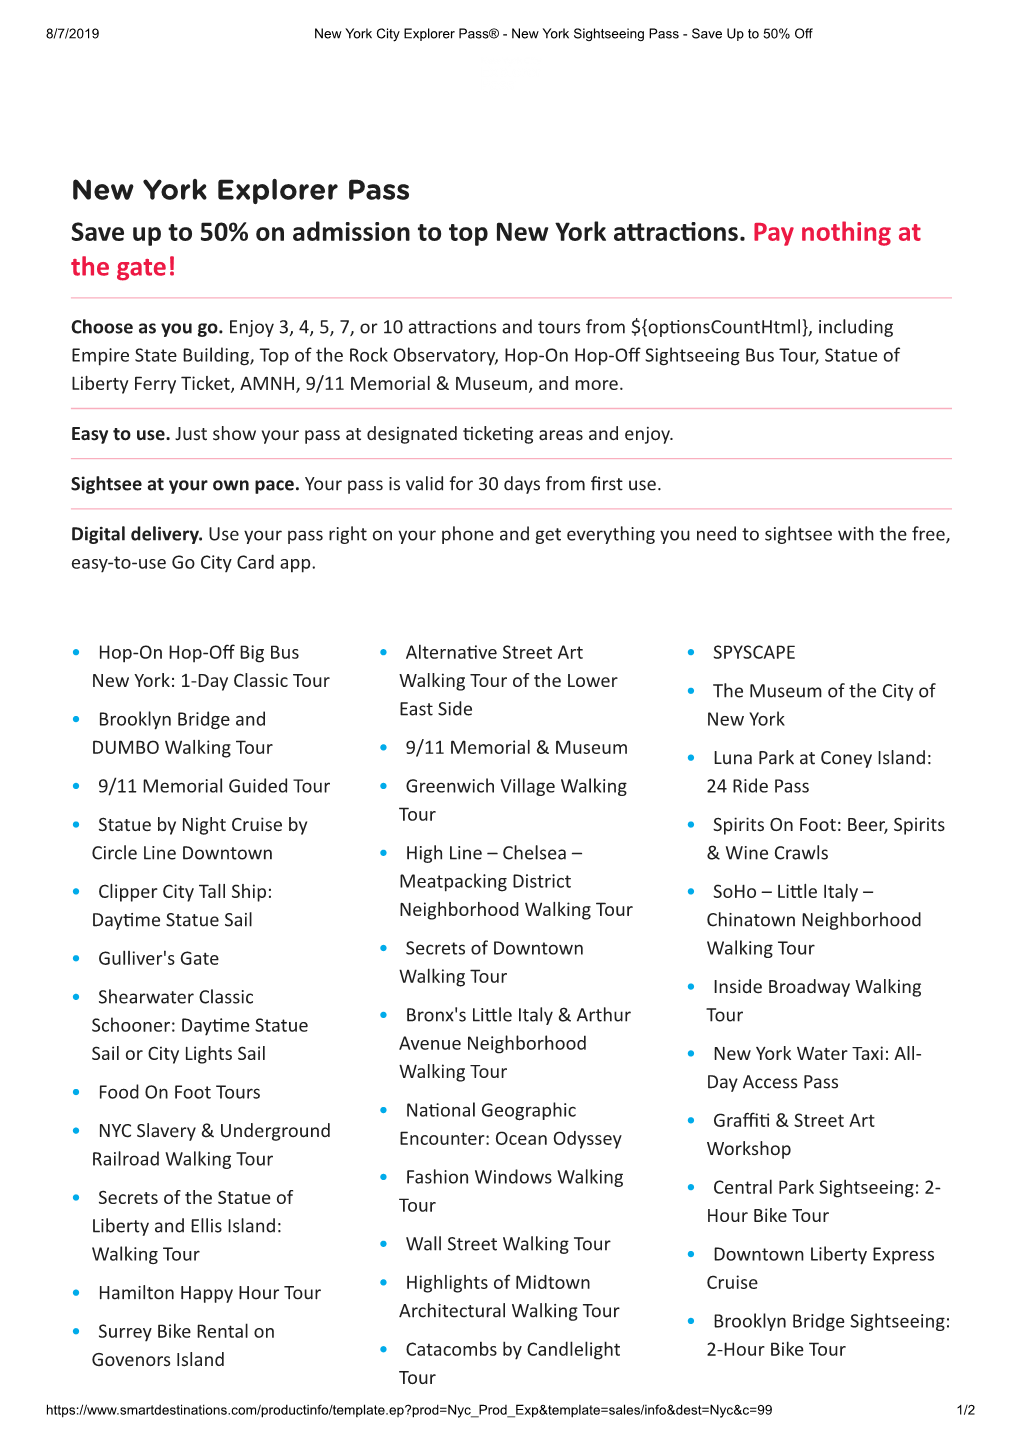 New York Explorer Pass Save up to 50% on Admission to Top New York A�Rac�Ons